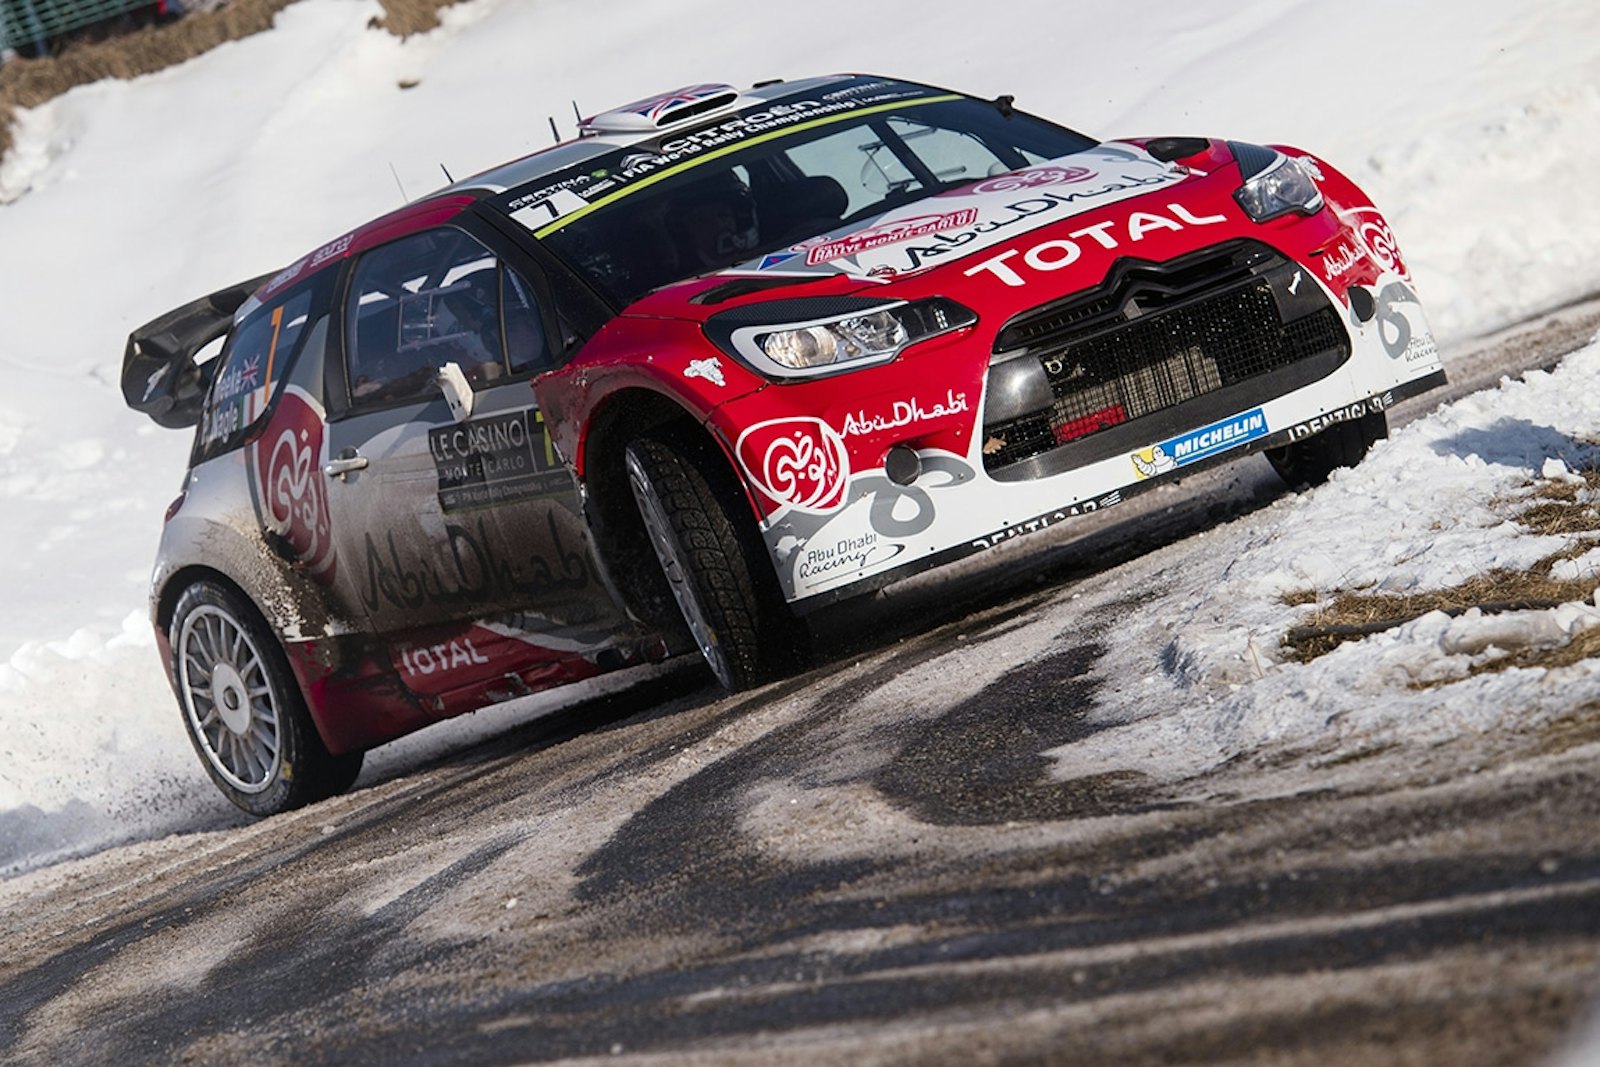 Kris Meeke (GBR) competes during the FIA World Rally Championship 2016 in Monte Carlo, Monaco on January 23, 2016 // Jaanus Ree/Red Bull Content Pool // P-20160124-00001 // Usage for editorial use only // Please go to www.redbullcontentpool.com for further information. //